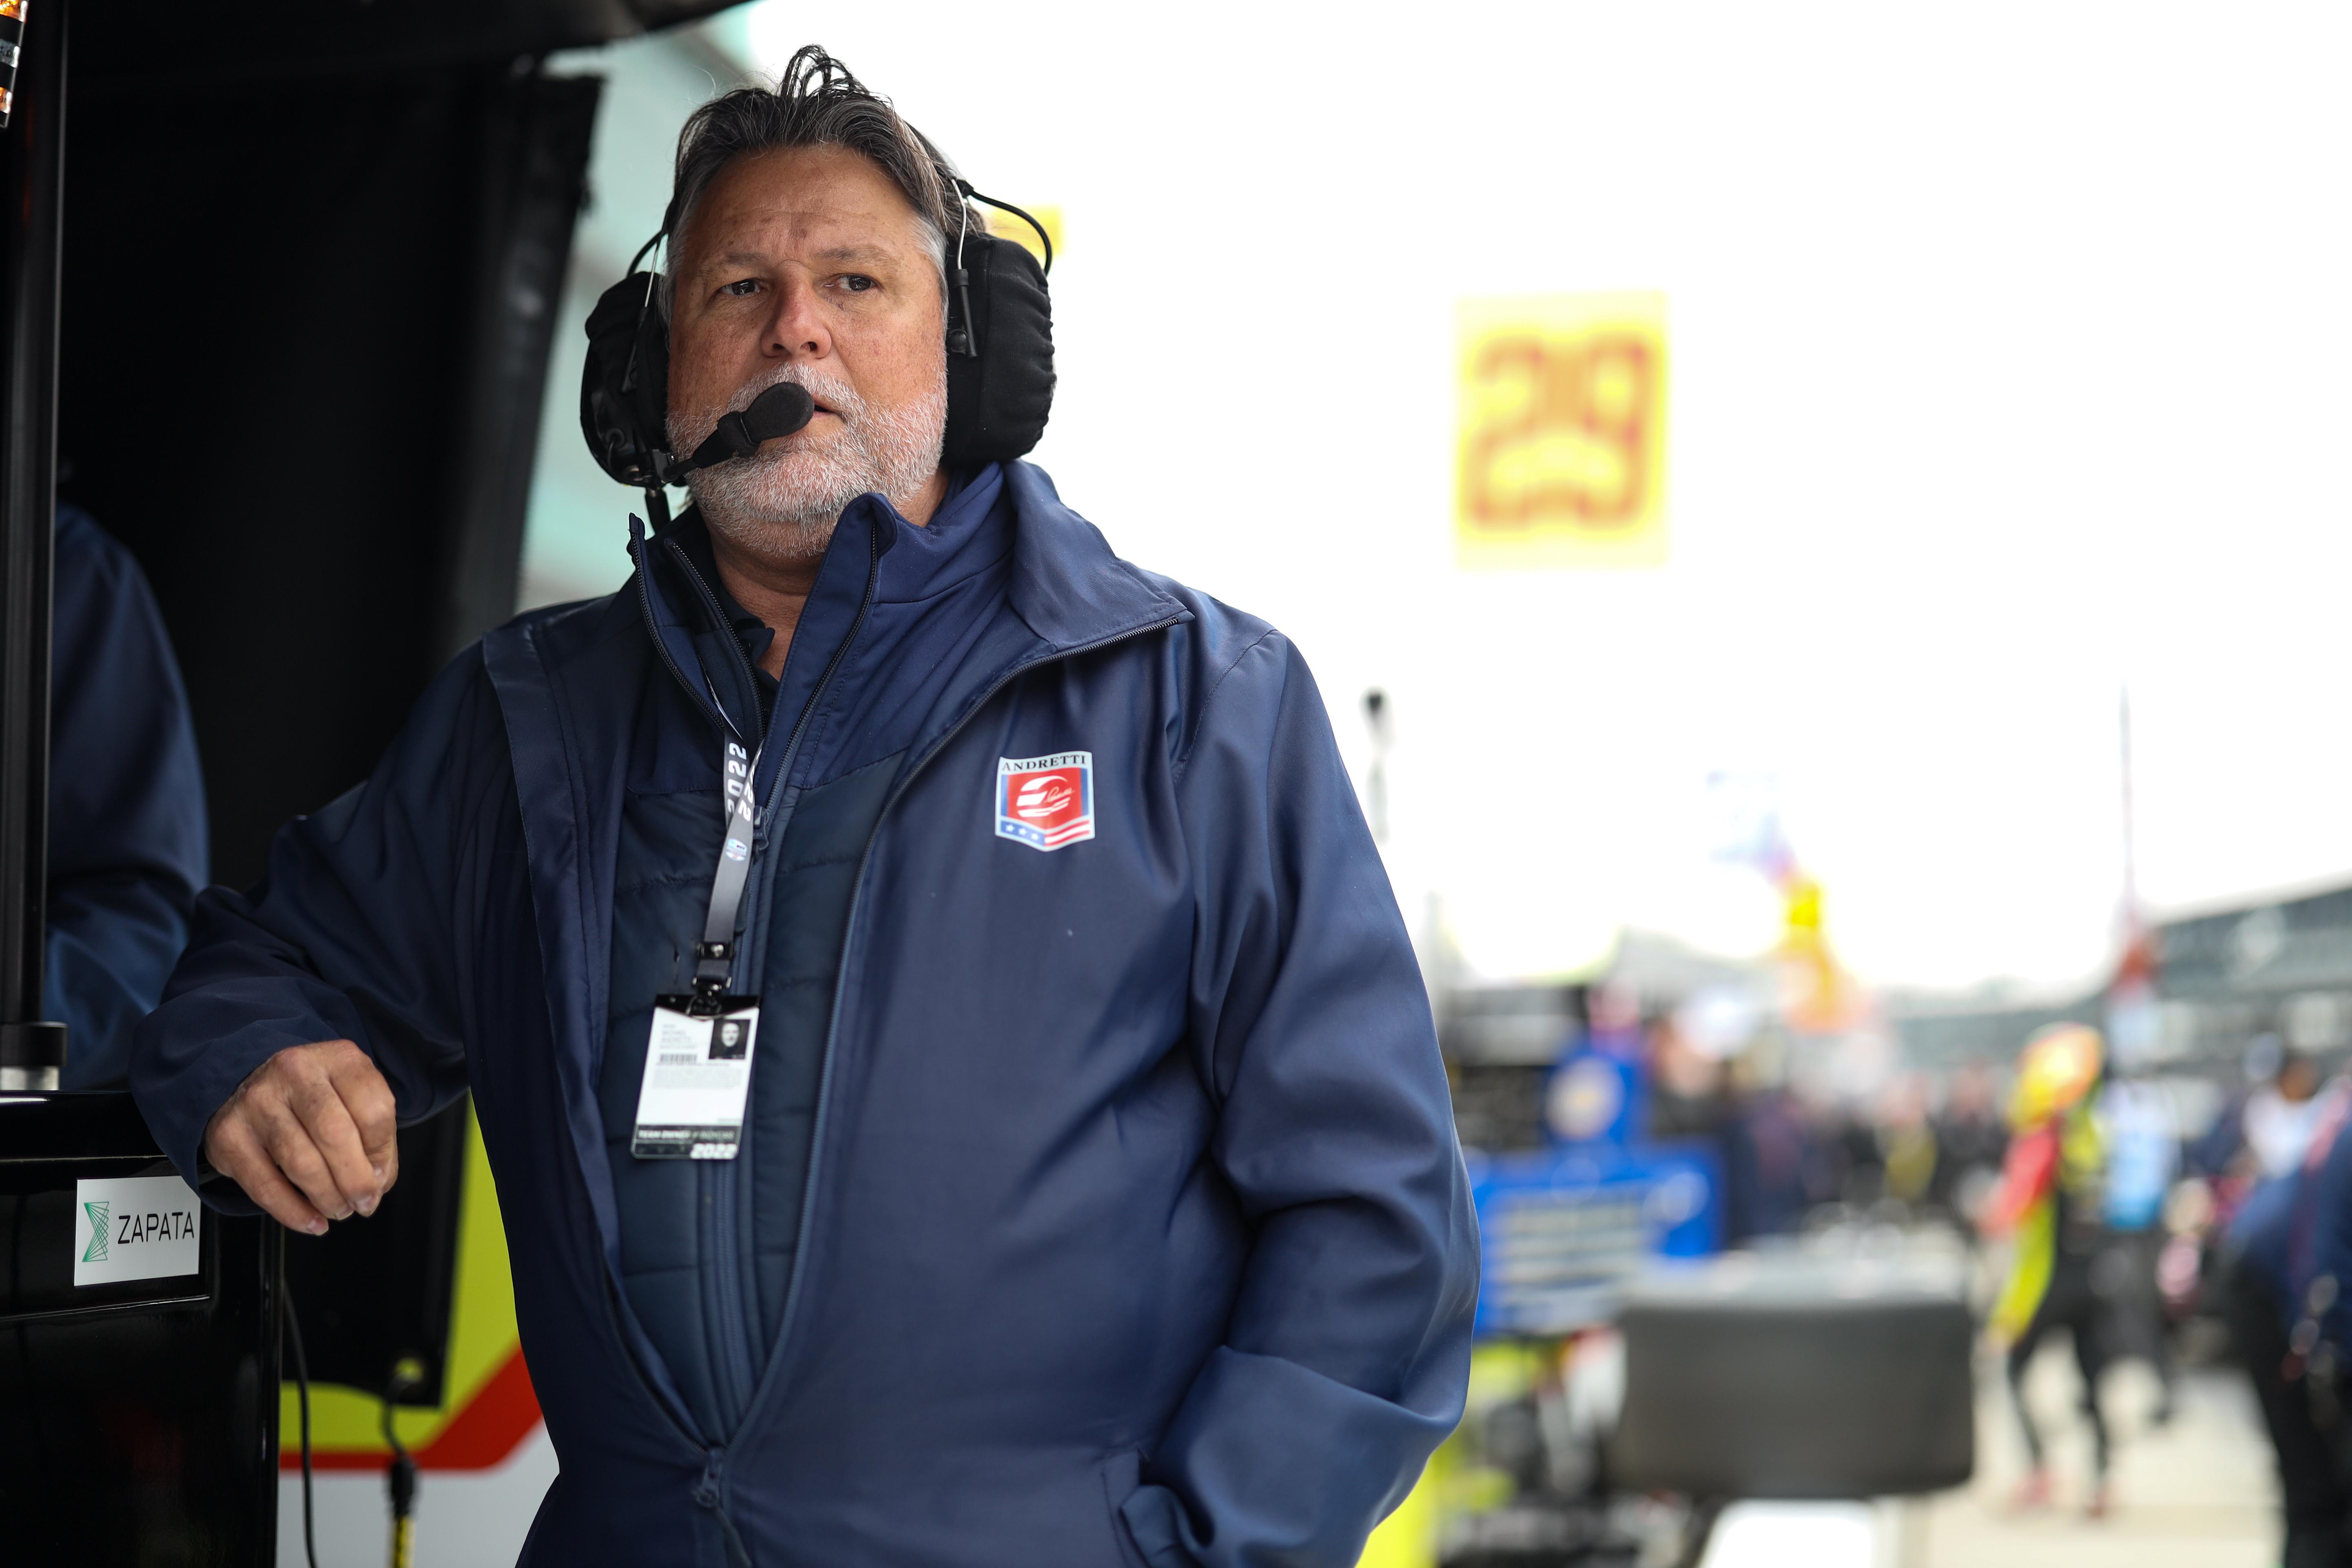 Michael Andretti looks to continue expanding his Andretti Autosport empire. Next up could be Formula One. Photo: Joe Skibinski / IndyCar.